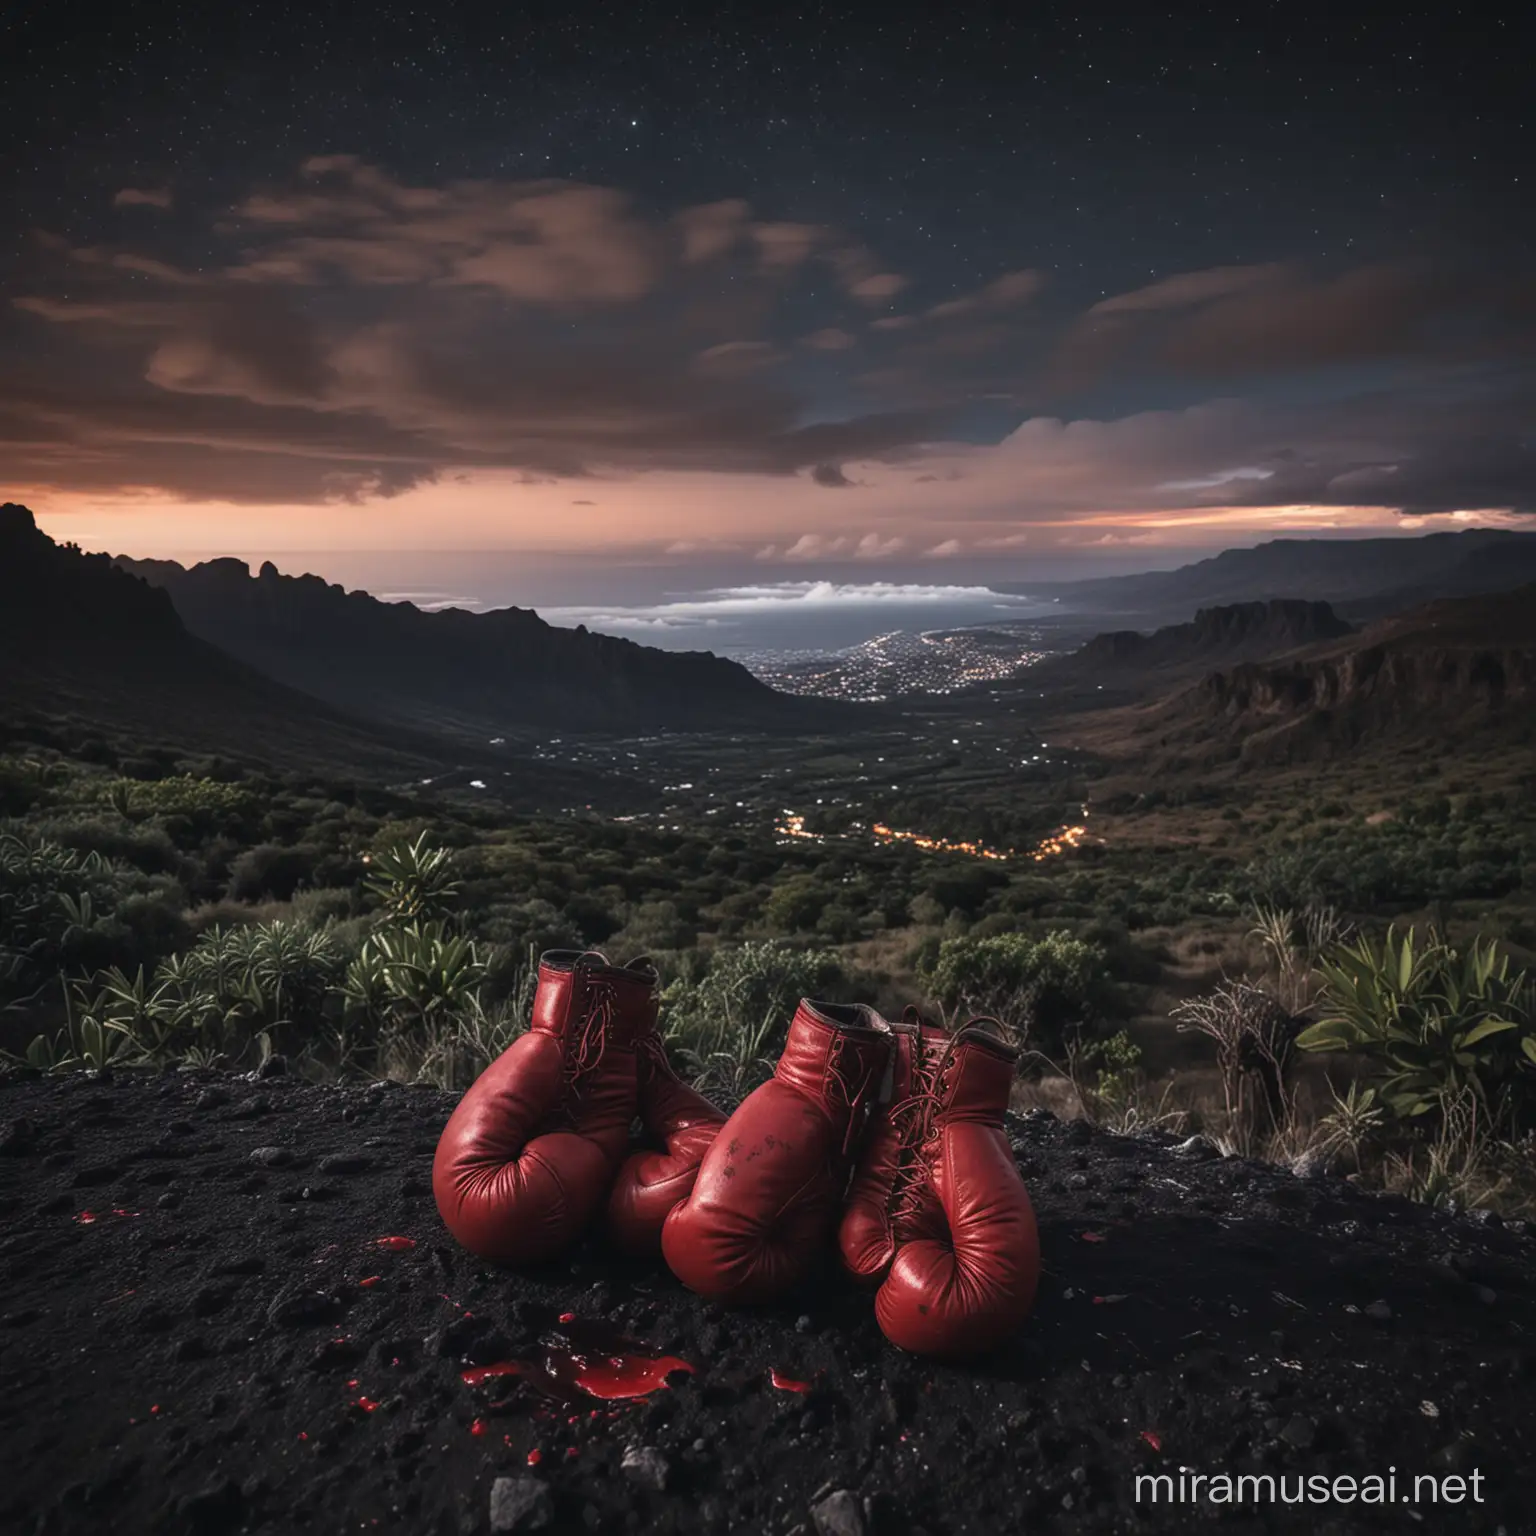 Reunion Island Night Landscape with BloodStained Vintage Boxing Gloves